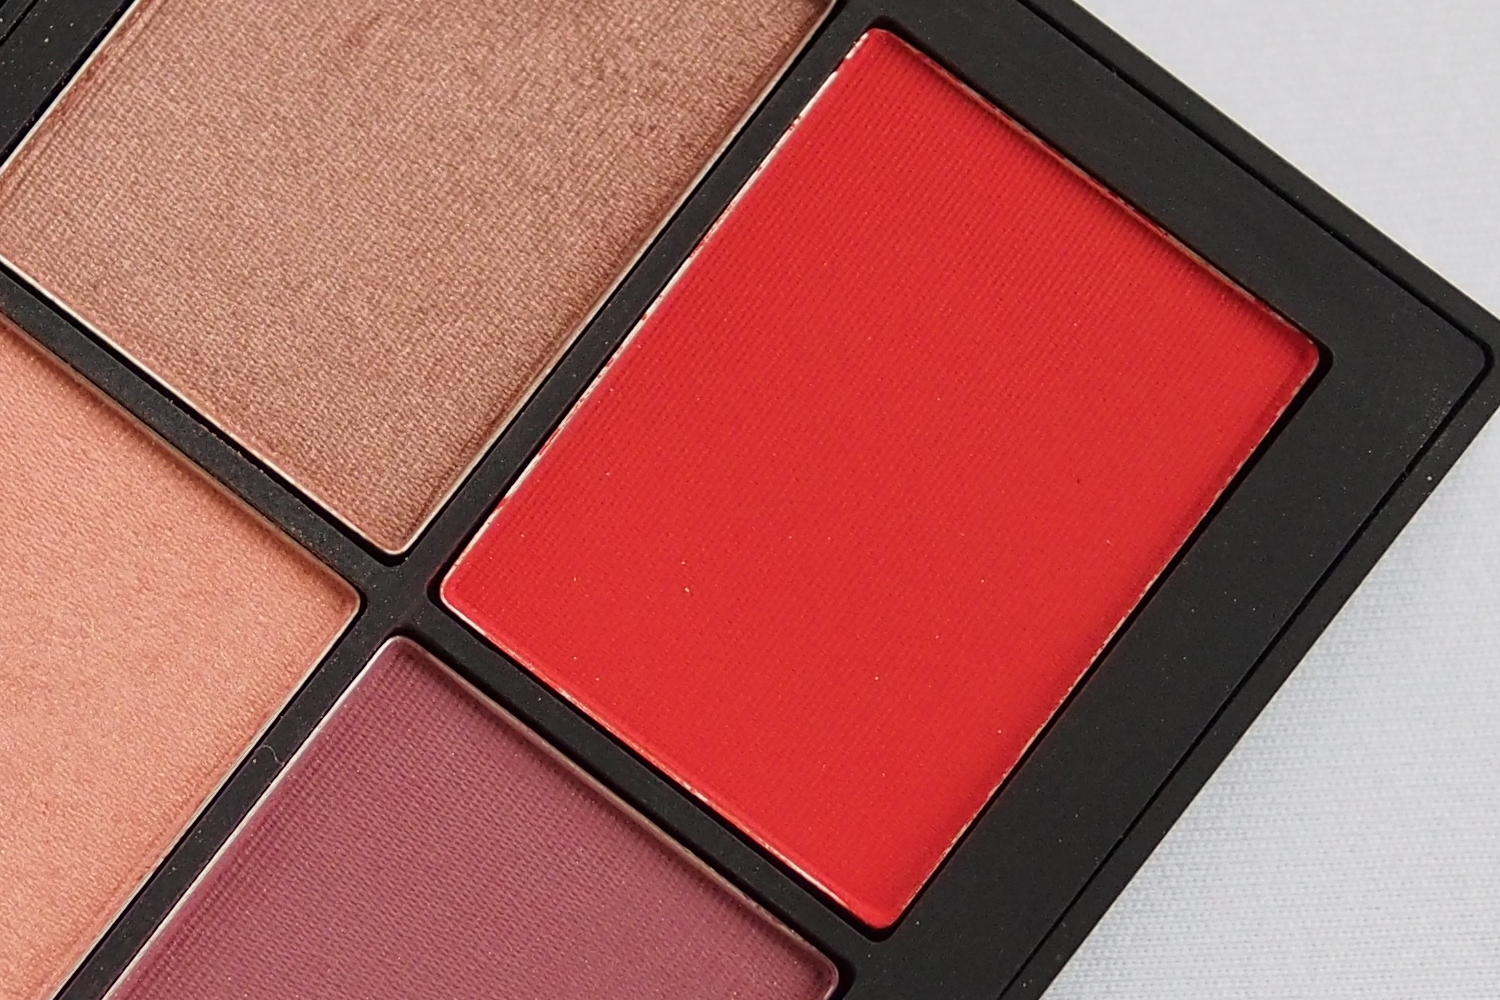 We tested four blushes for 10 hours each - which one is the best